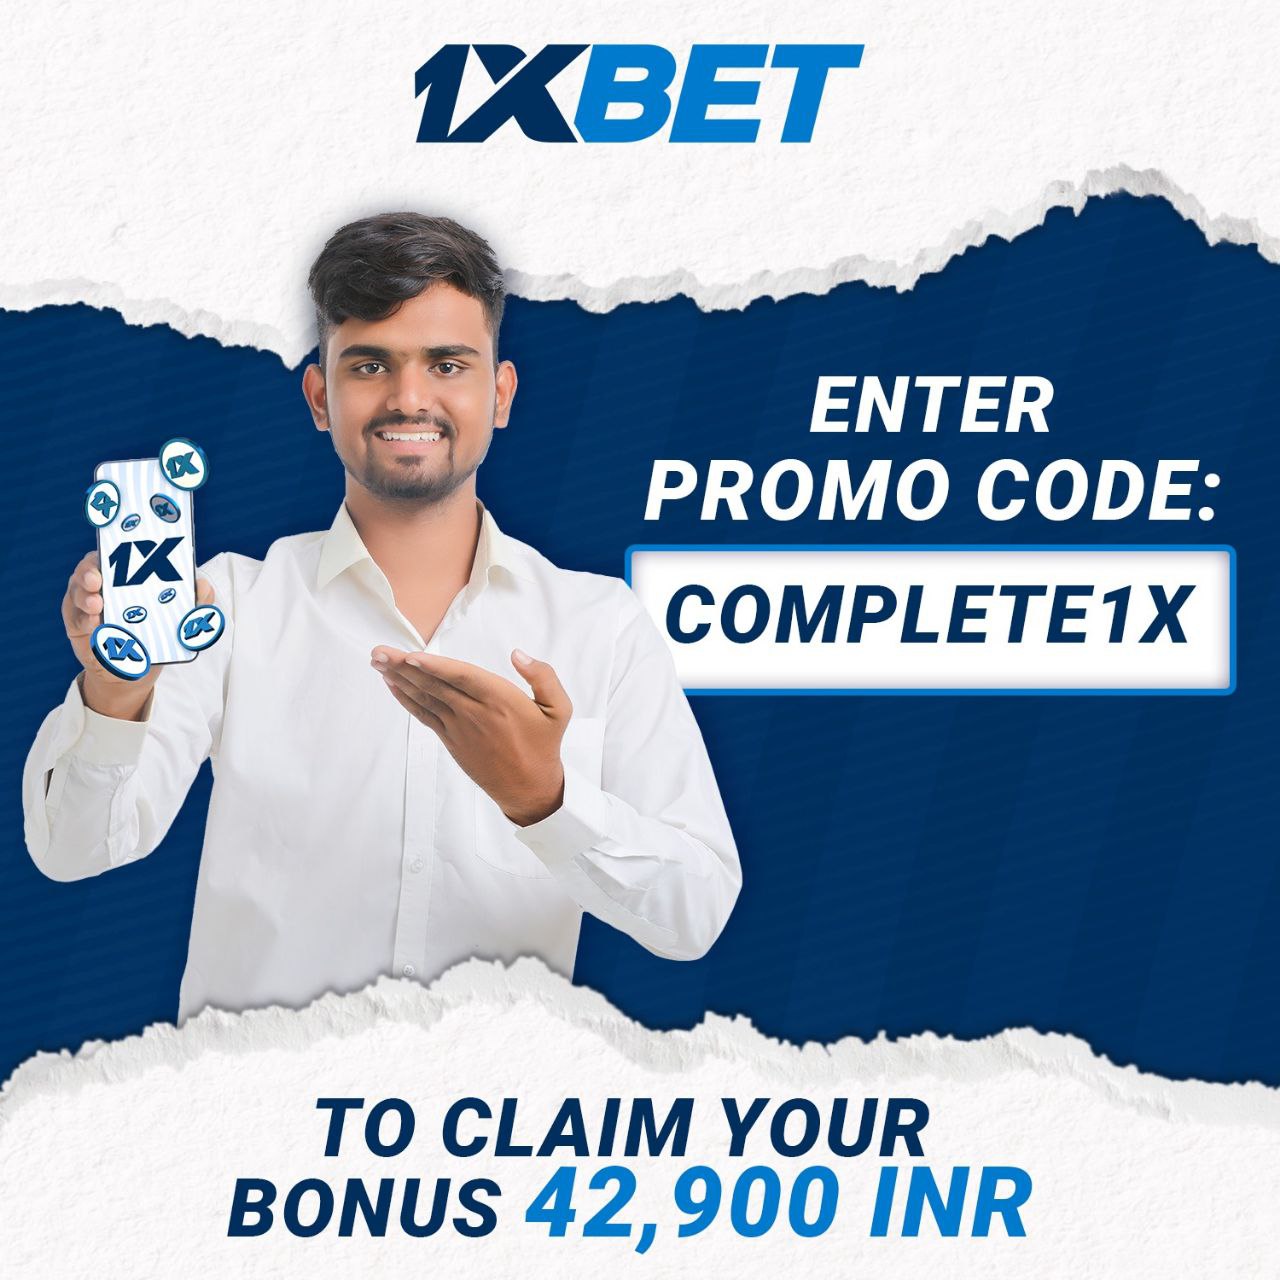 1xBet 120% Welcome Bonus India: 33,000 INR  in Free Bets